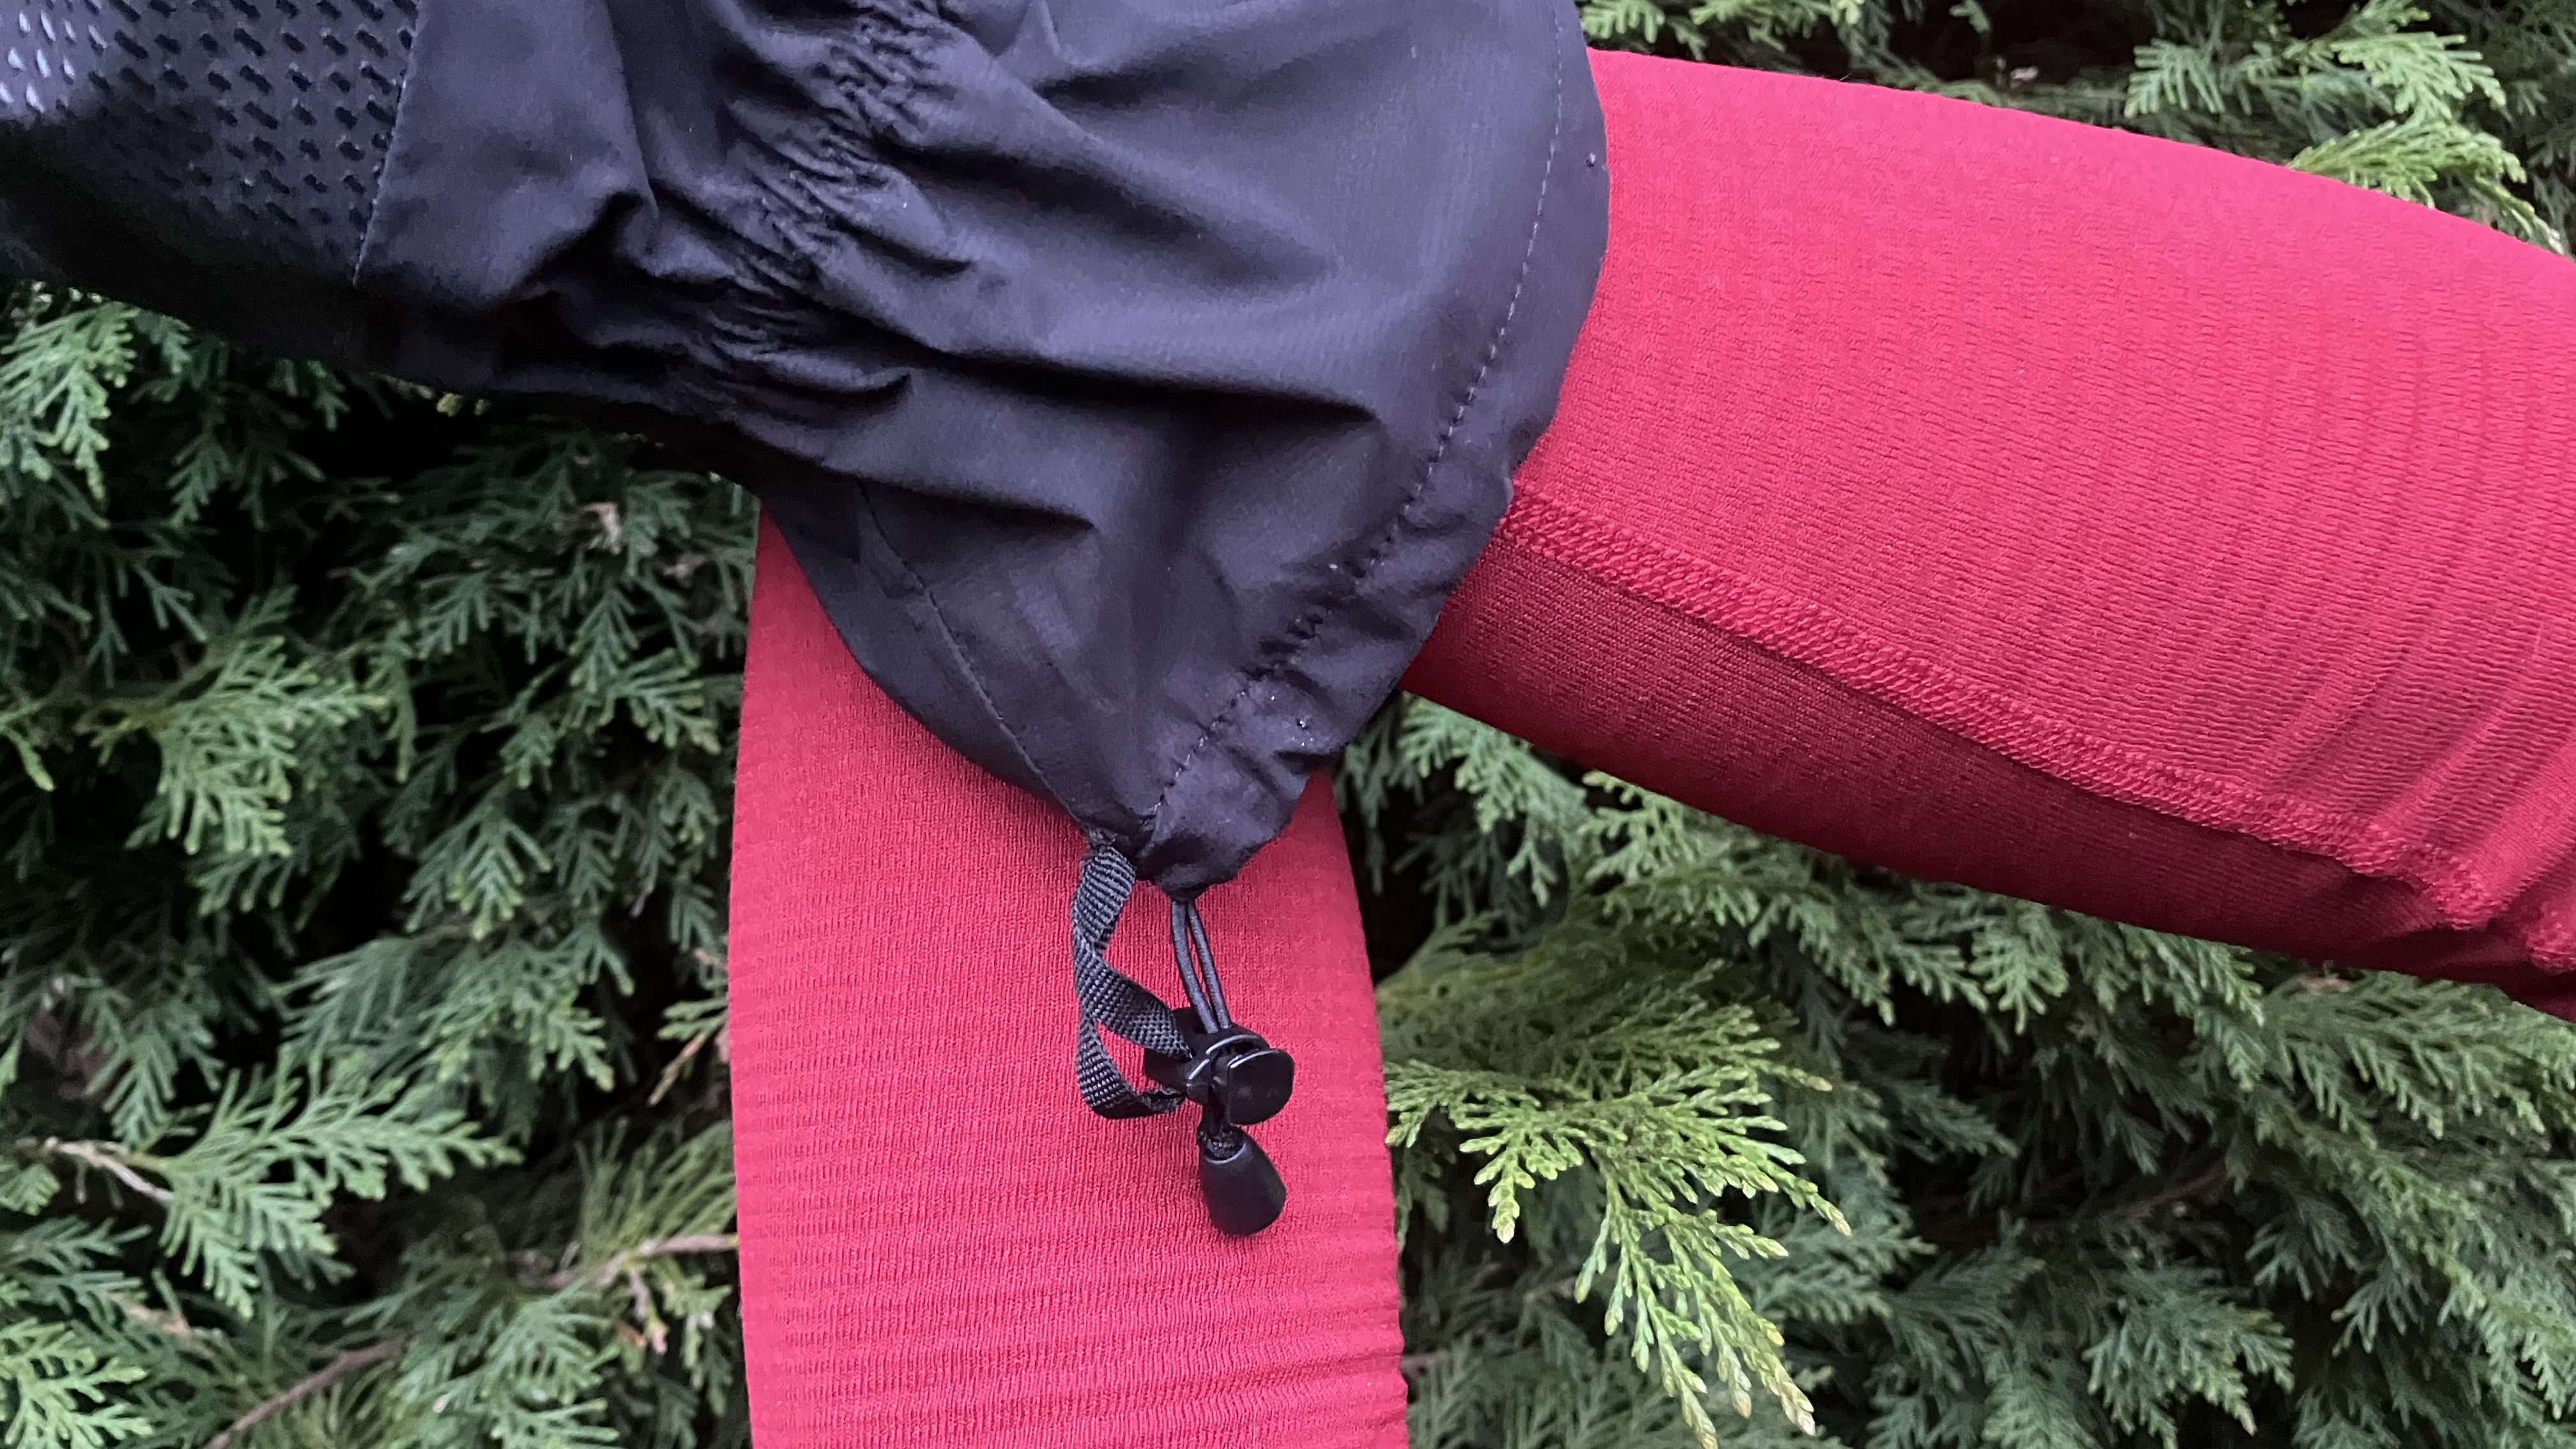 Sportful Lobster Gloves review – magic shell…